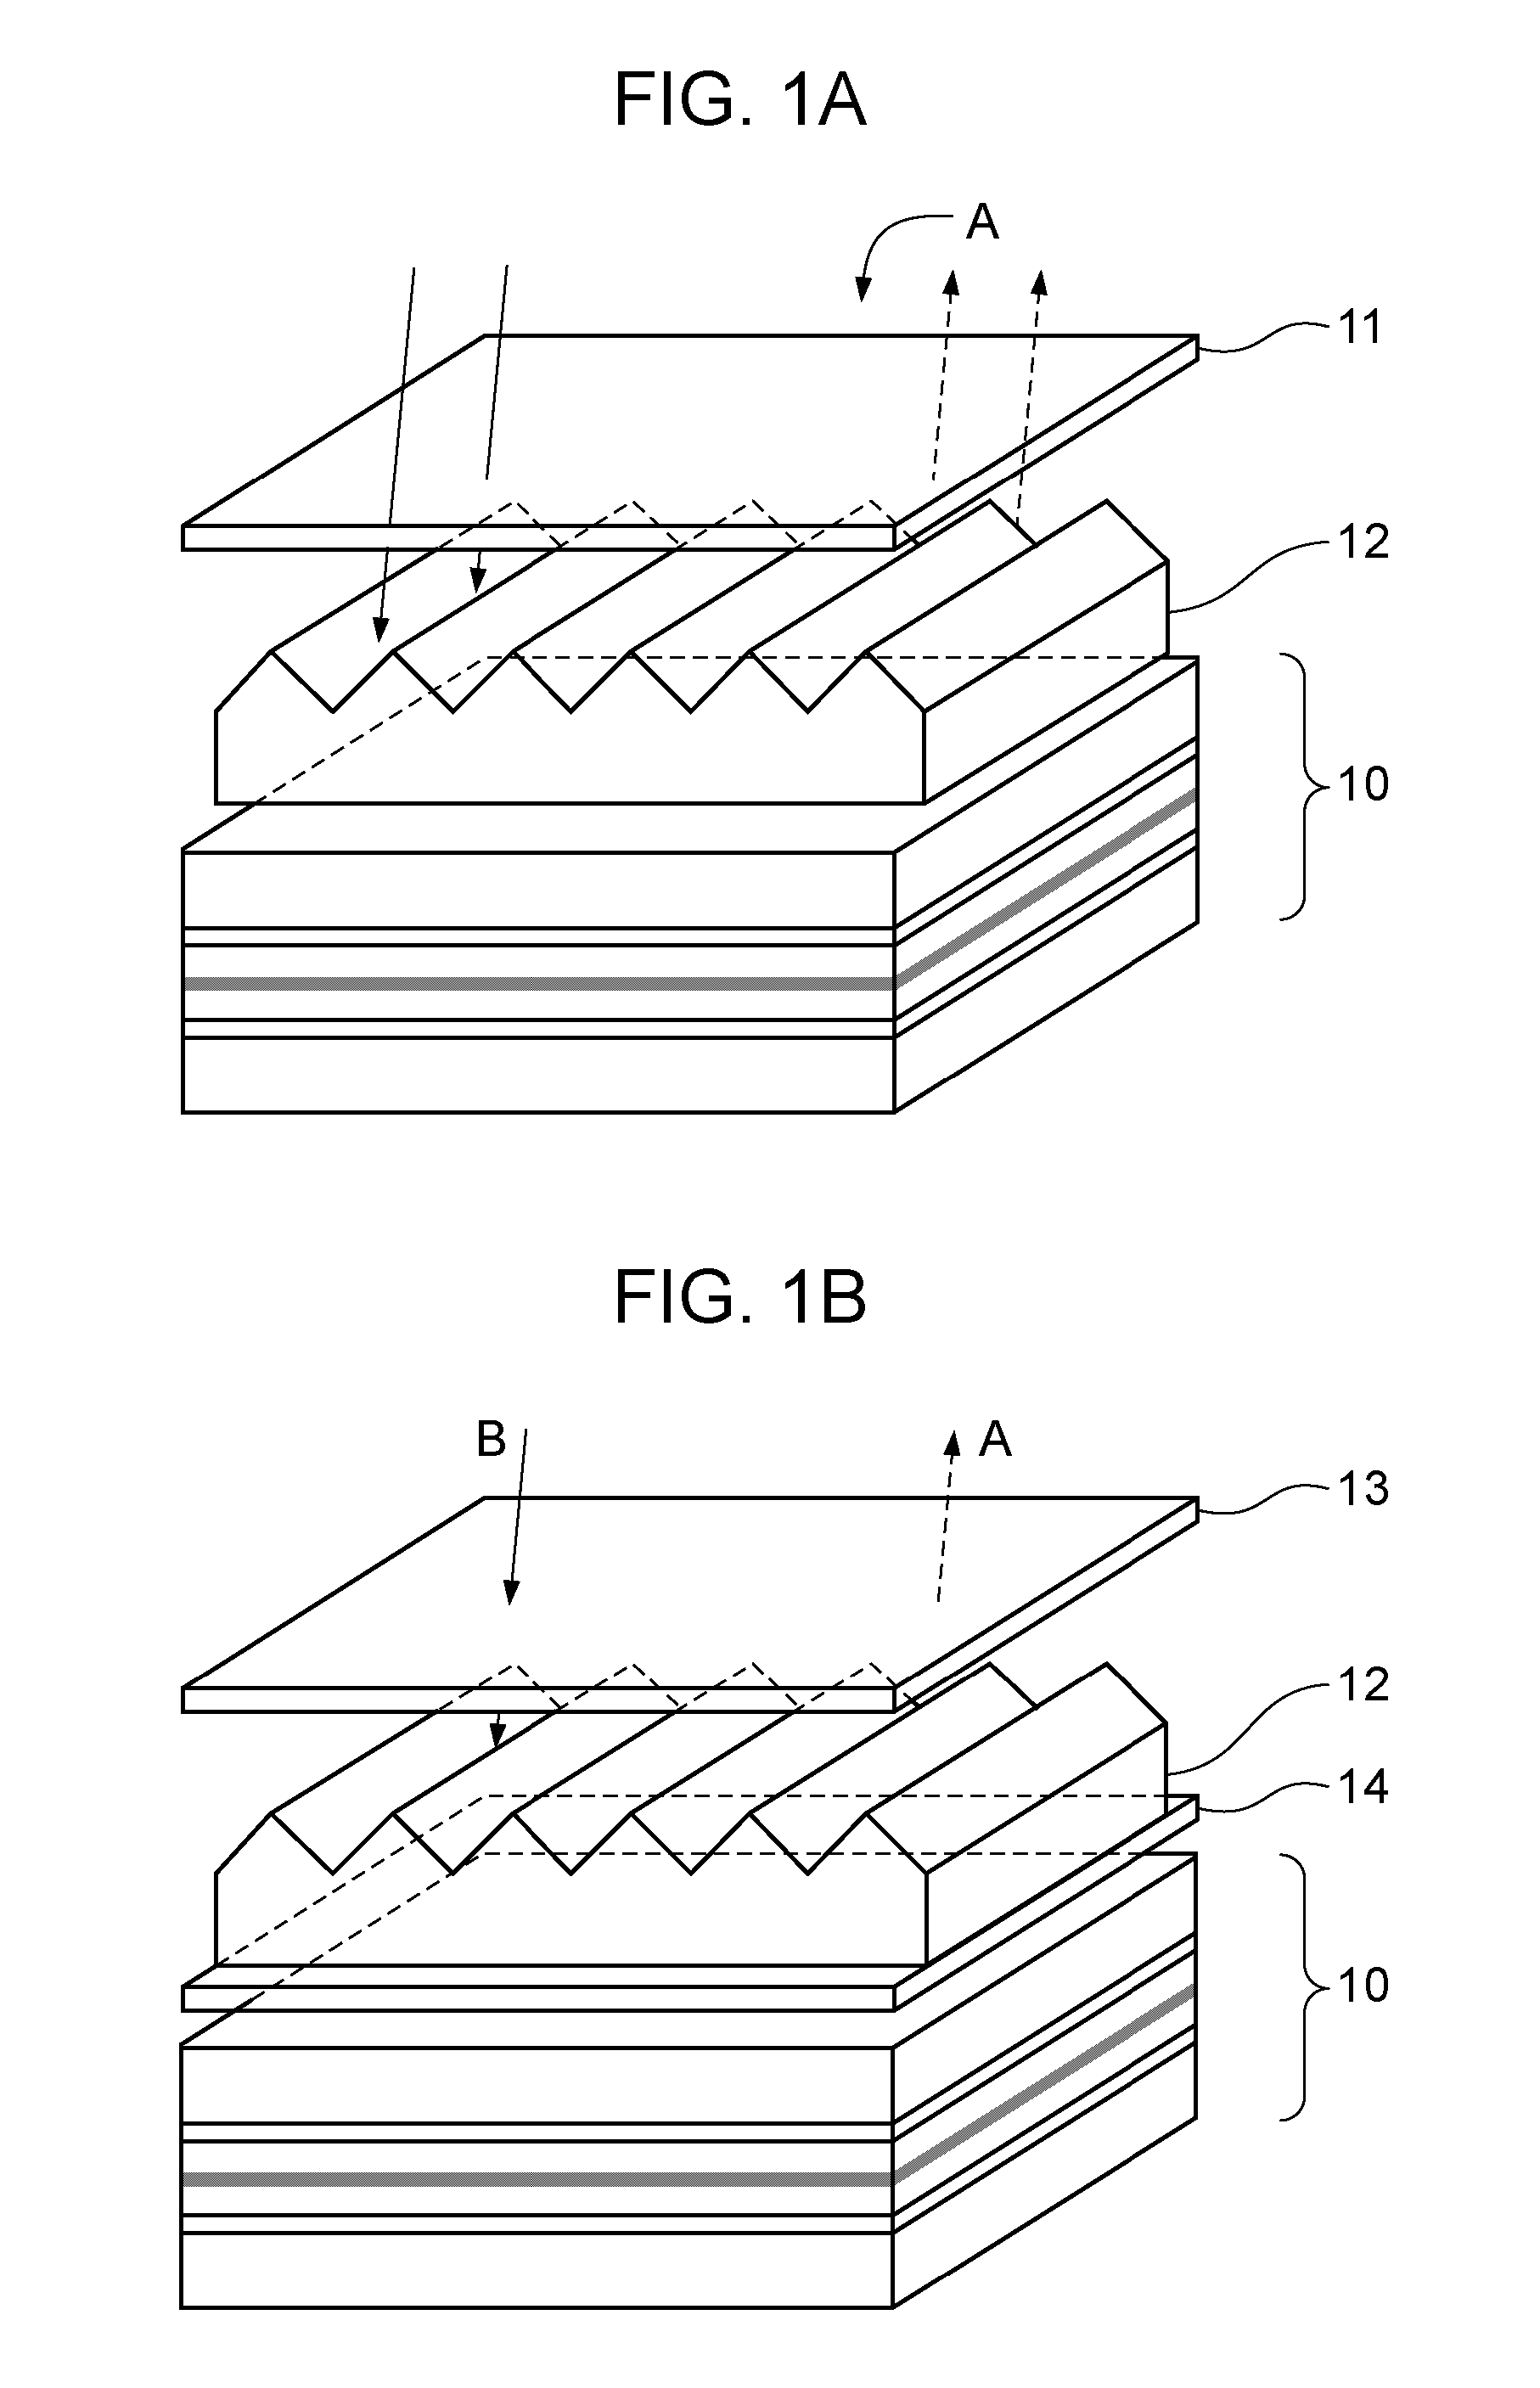 Organic electroluminescent device provided with a polarizing plate, a prism member and a phase member in a stacked arrangement